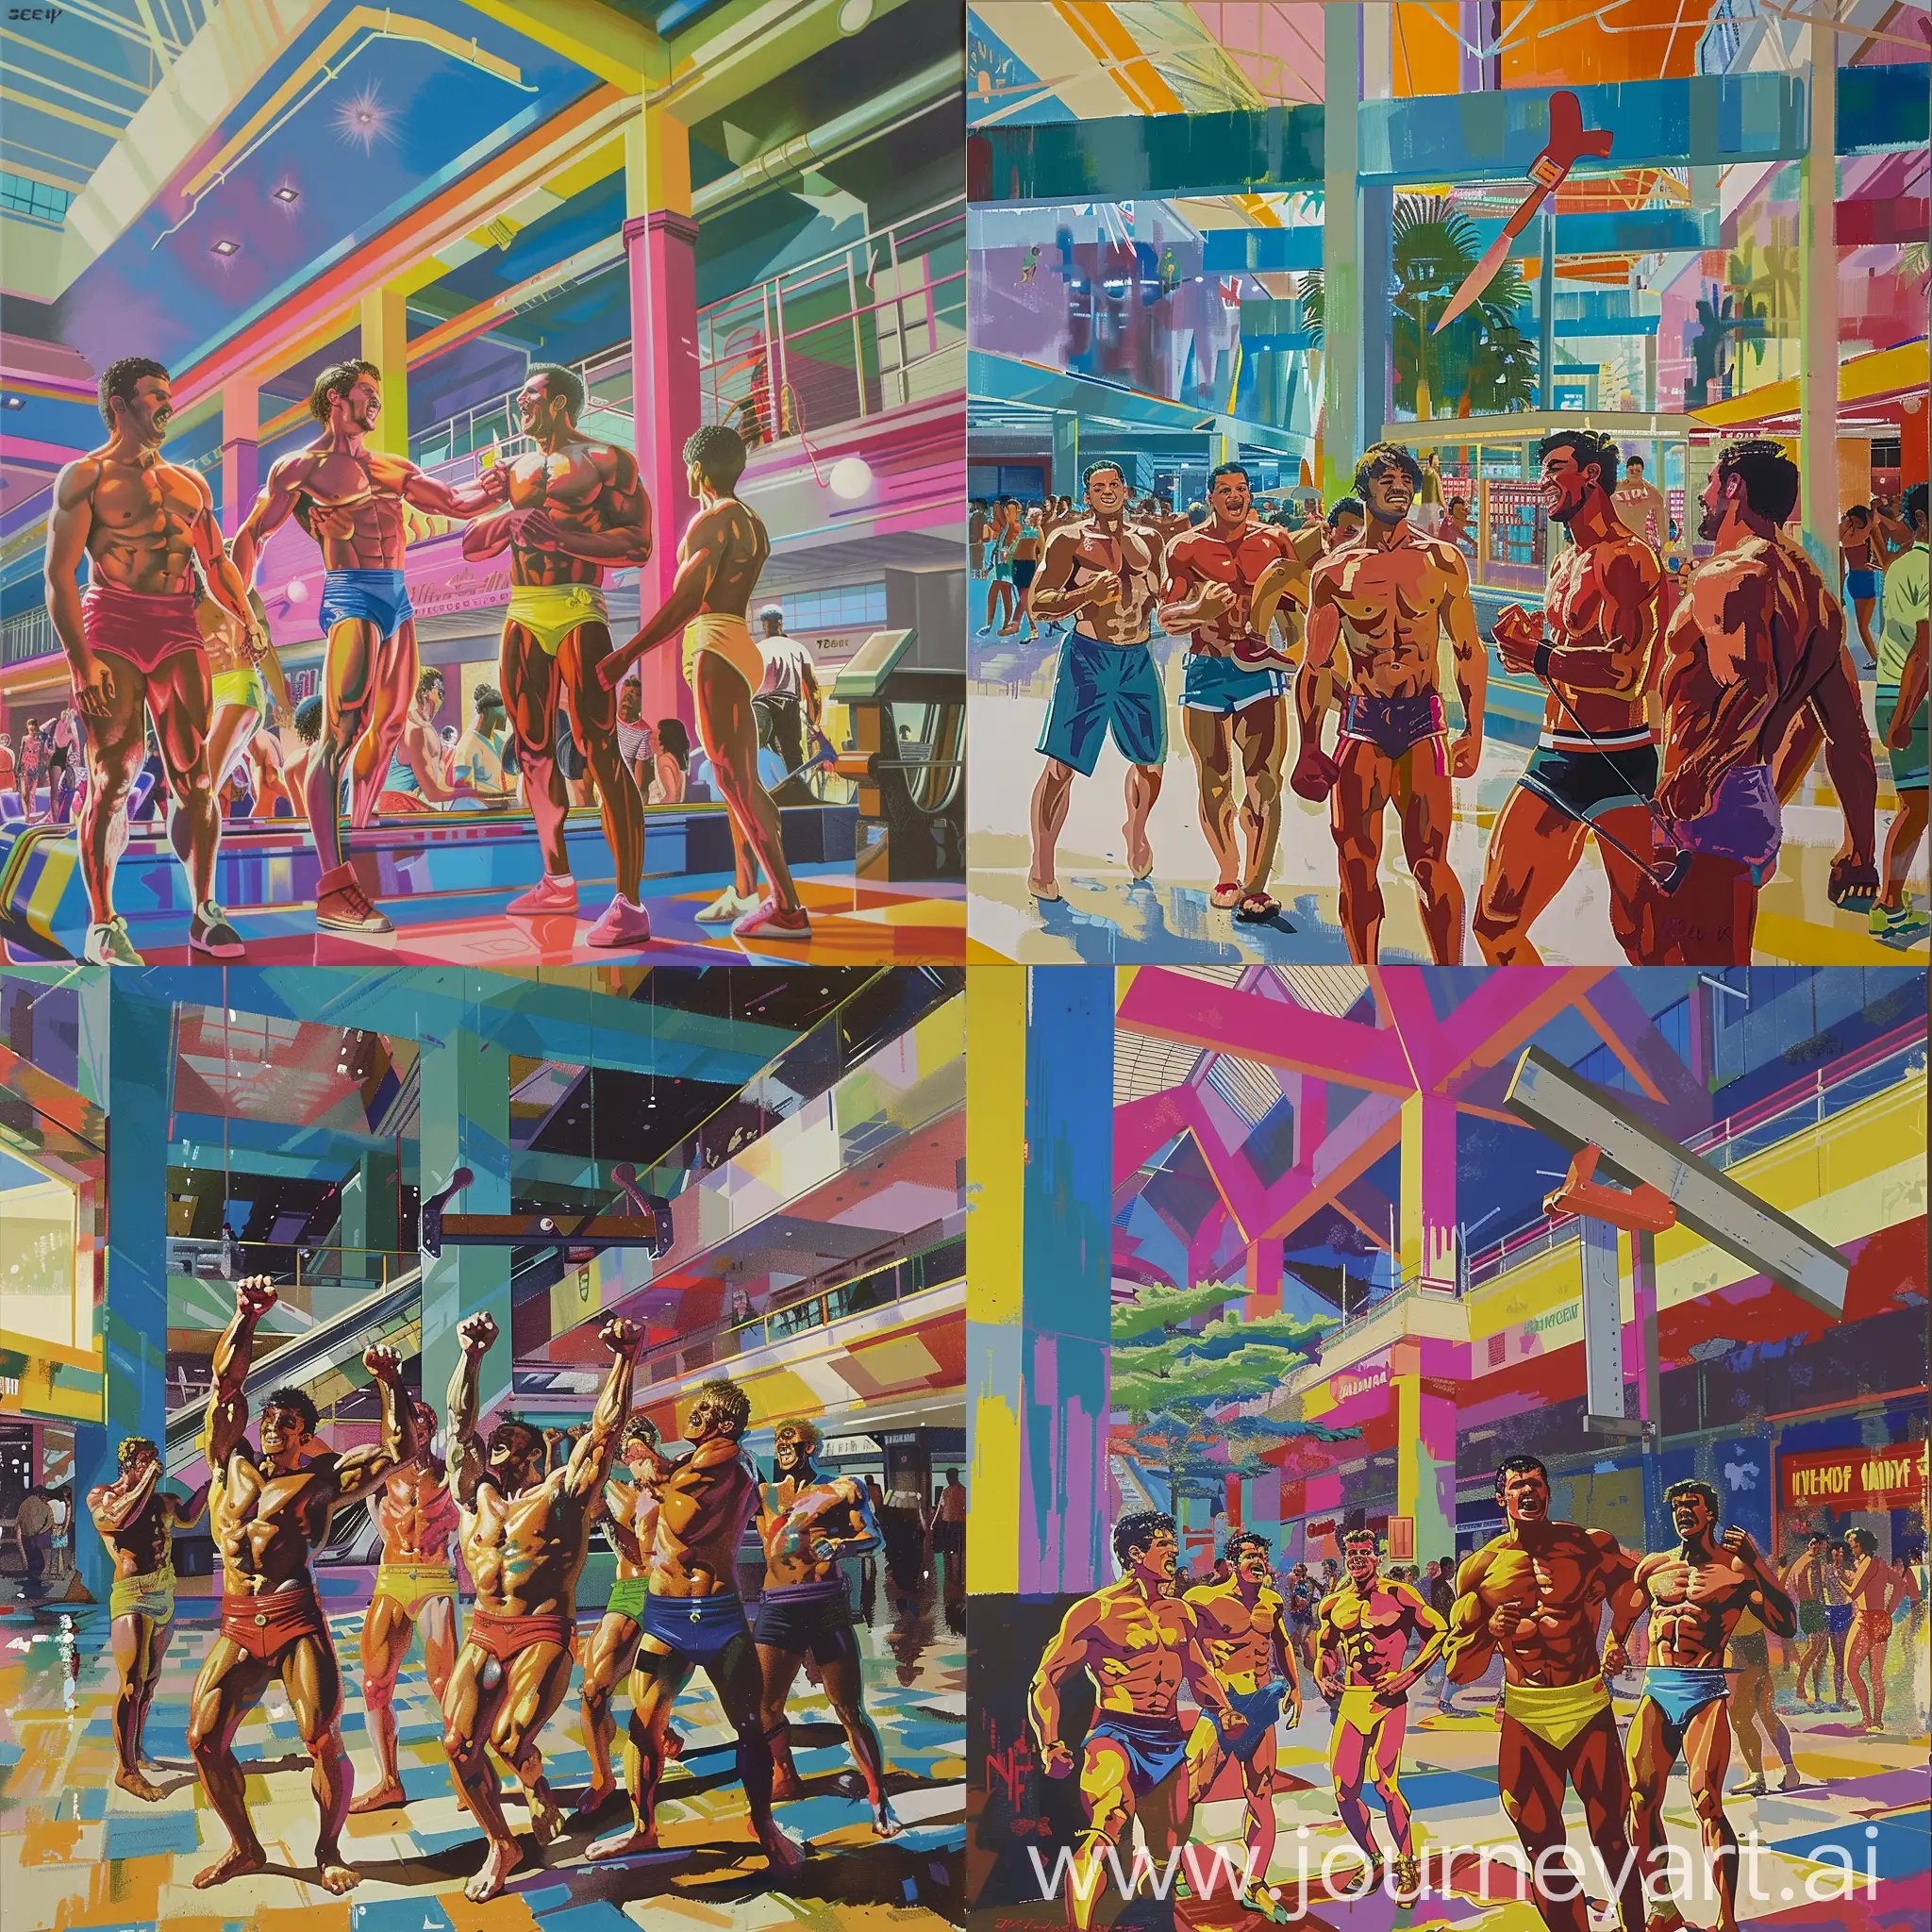 a colorful painting of a group of playful muscular men inside a mall with a guillotine display in the 1980s